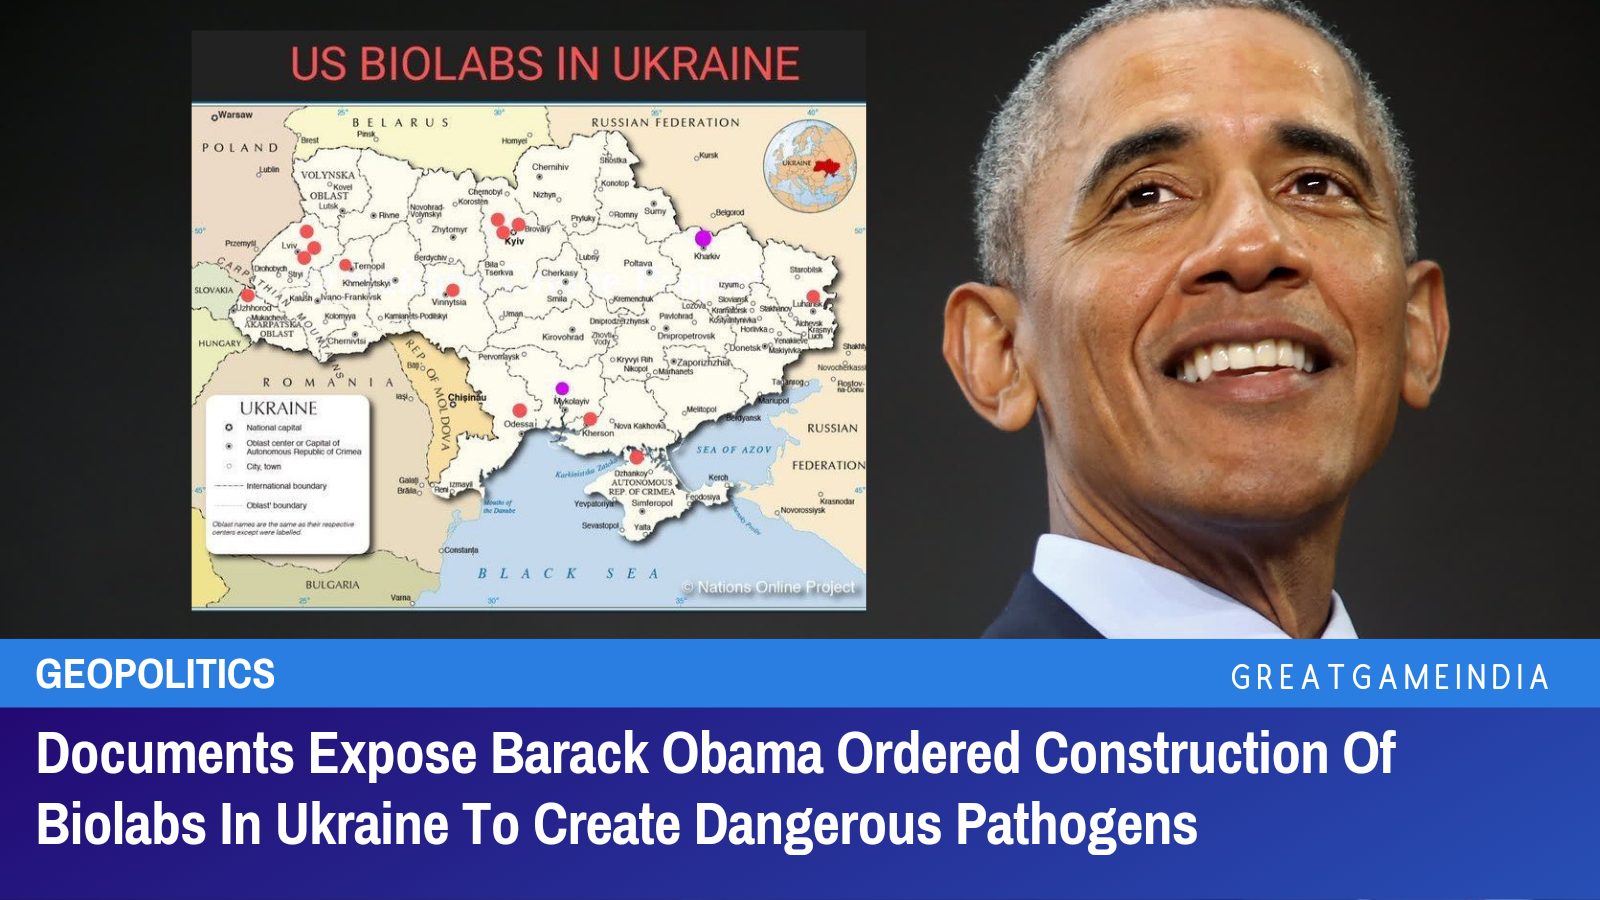 Documents Expose Barack Obama Ordered Construction Of Biolabs In Ukraine To Create Dangerous Pathogens